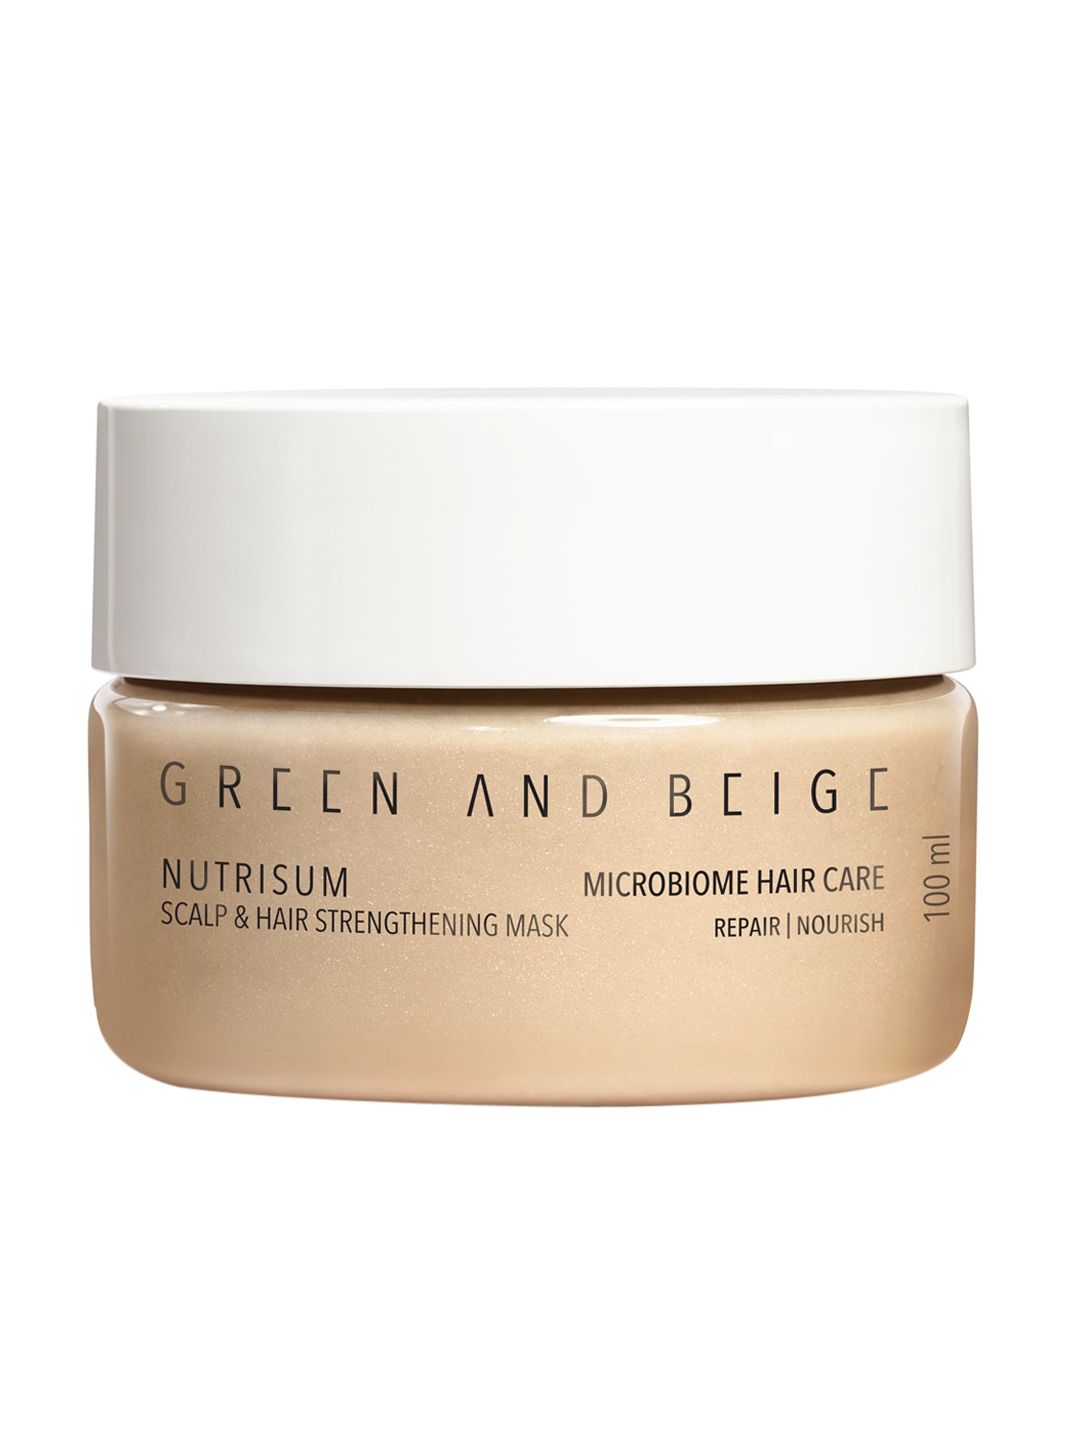 GREEN AND BEIGE Nutrisum Microbiome Hair Care Scalp & Hair Strengthening Mask - 100 ml Price in India